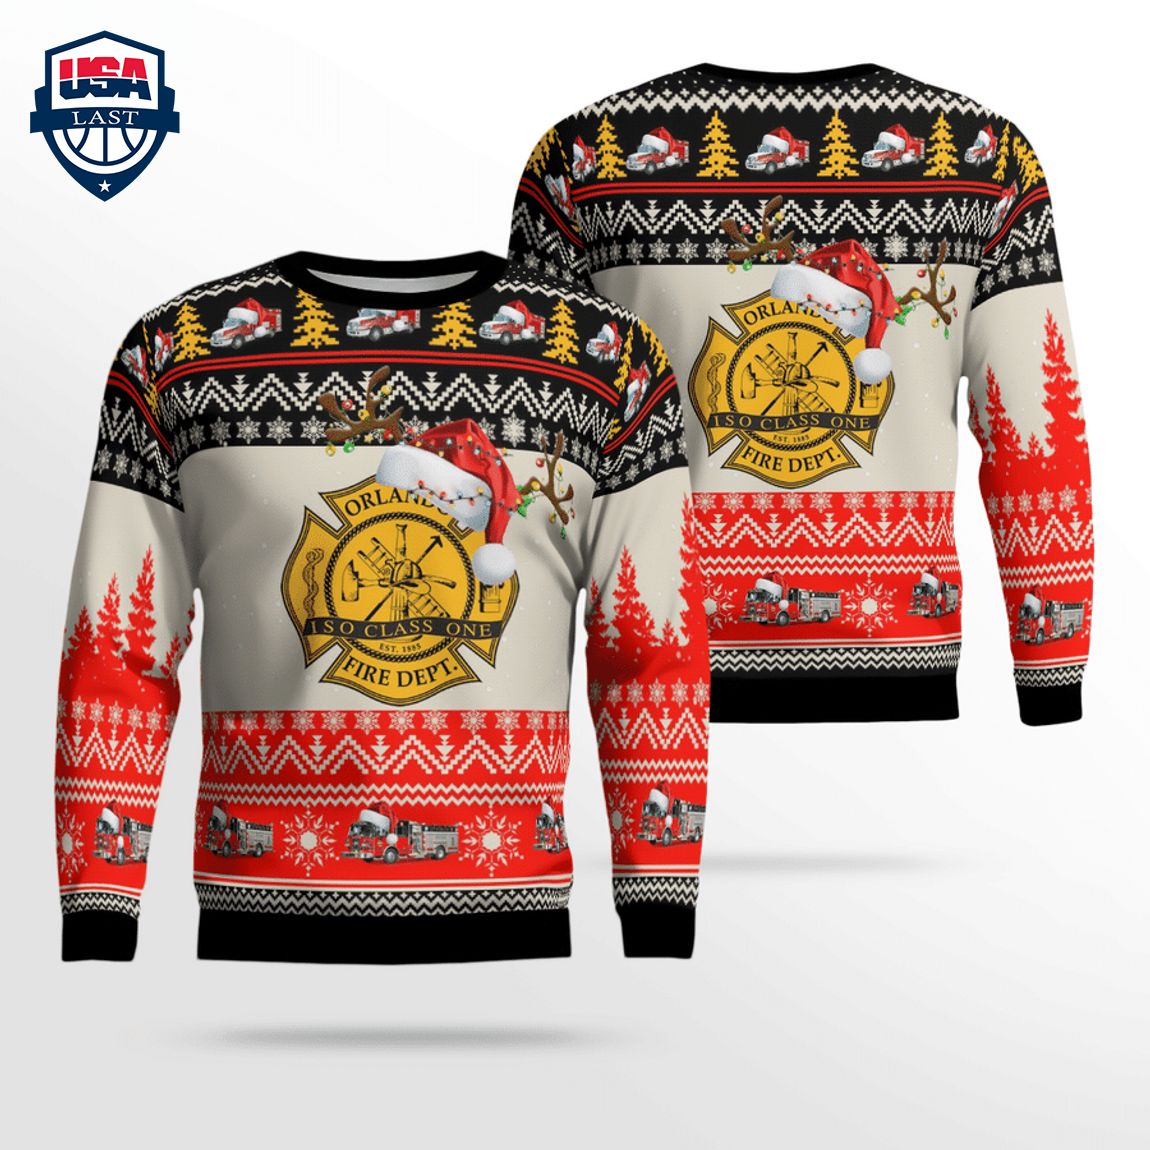 Florida Orlando Fire Department 3D Christmas Sweater - You look fresh in nature